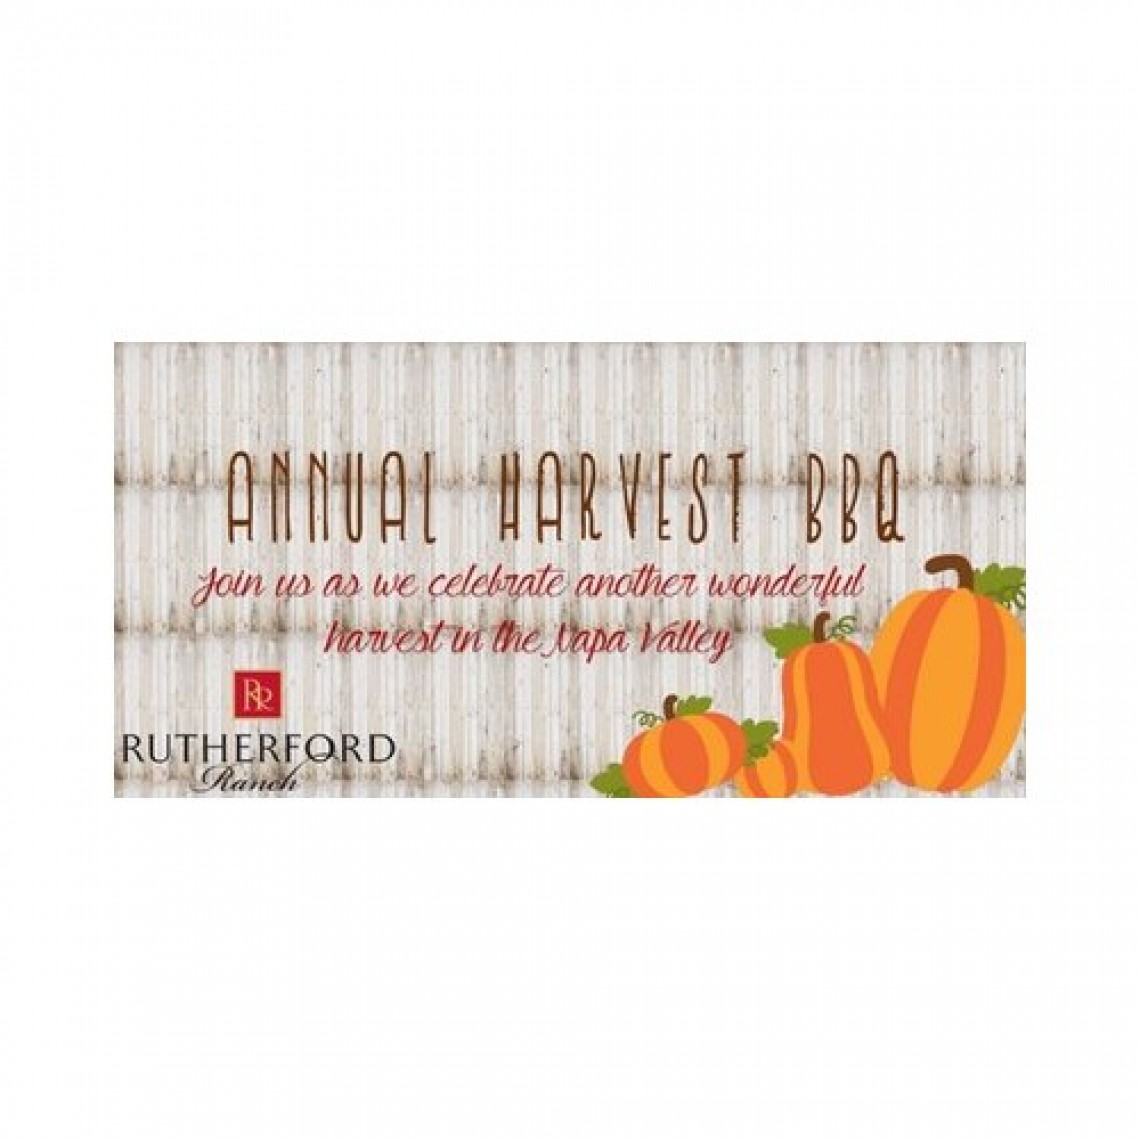 Annual Harvest BBQ at Rutherford Ranch Winery